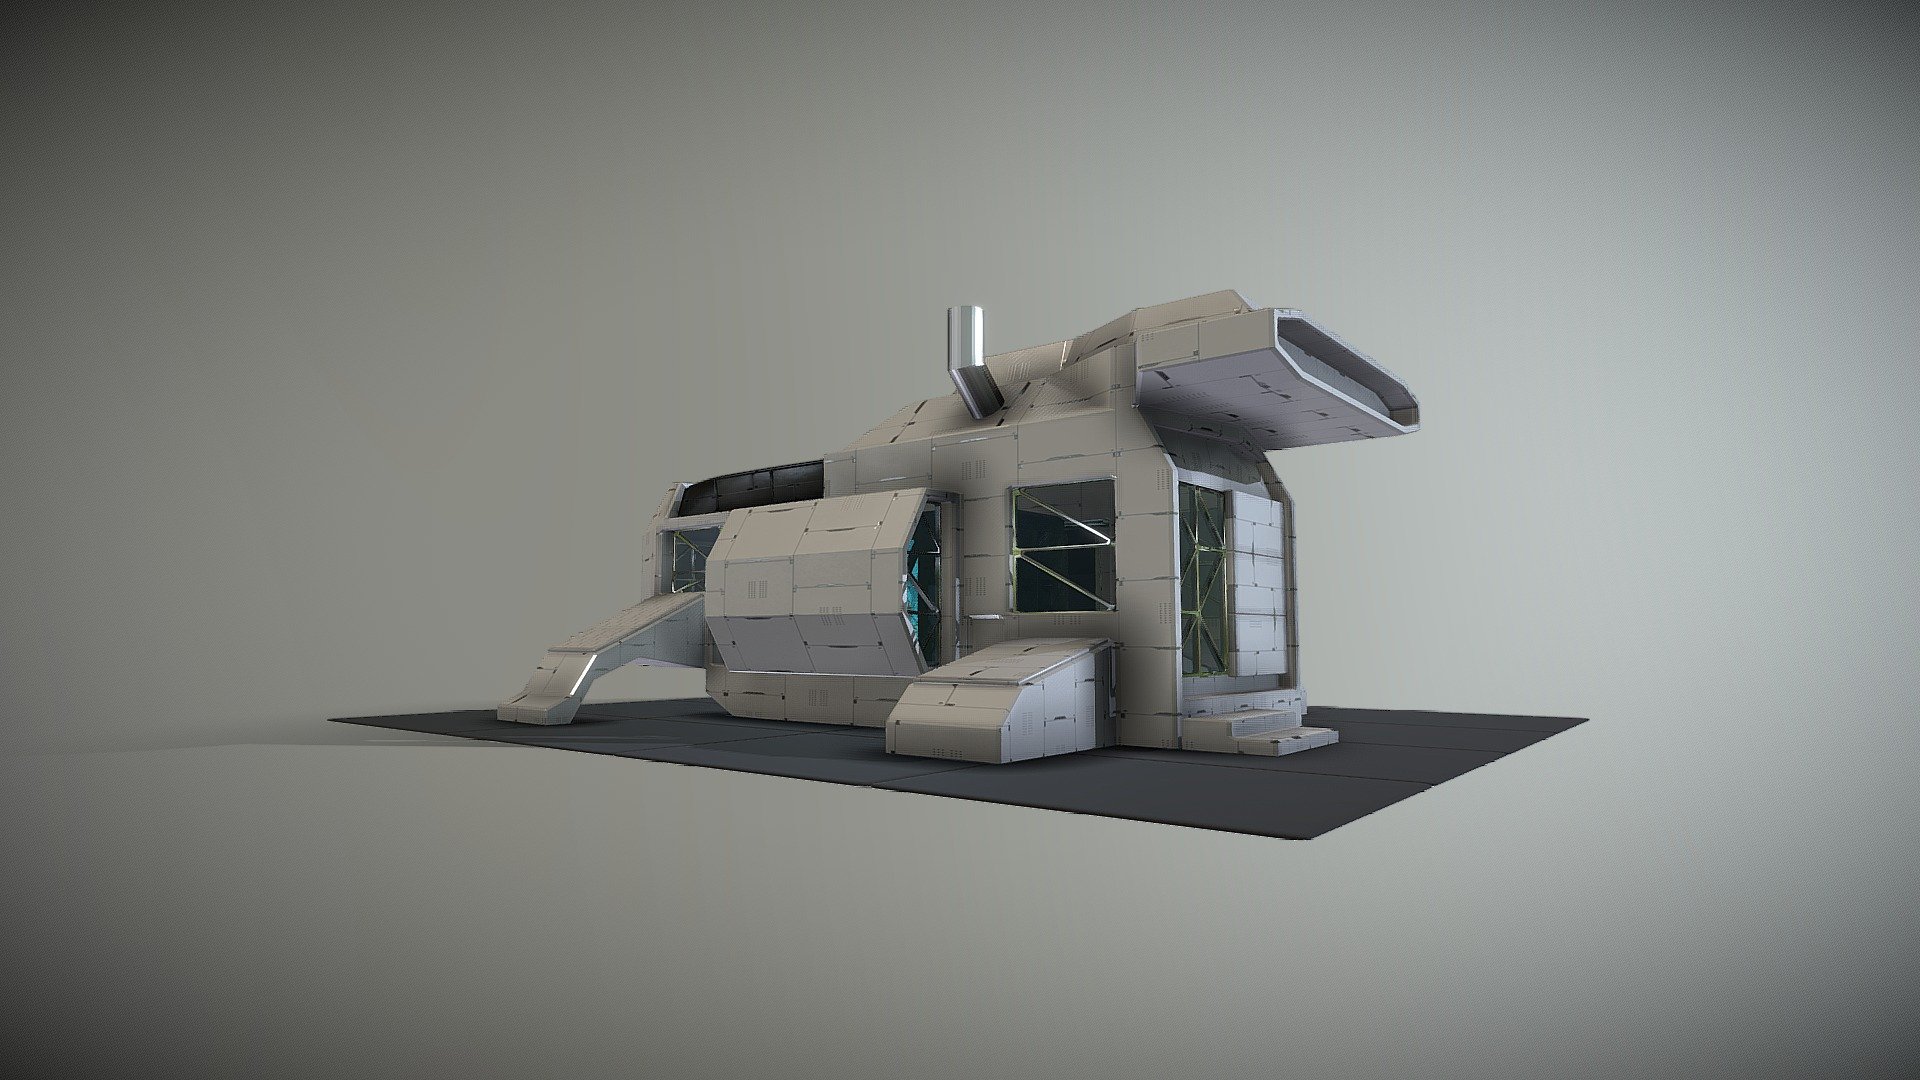 Conceptual Sci fi Energy generator / un-interupted power hub enclosure. Modeled with some structural integrity 3d model